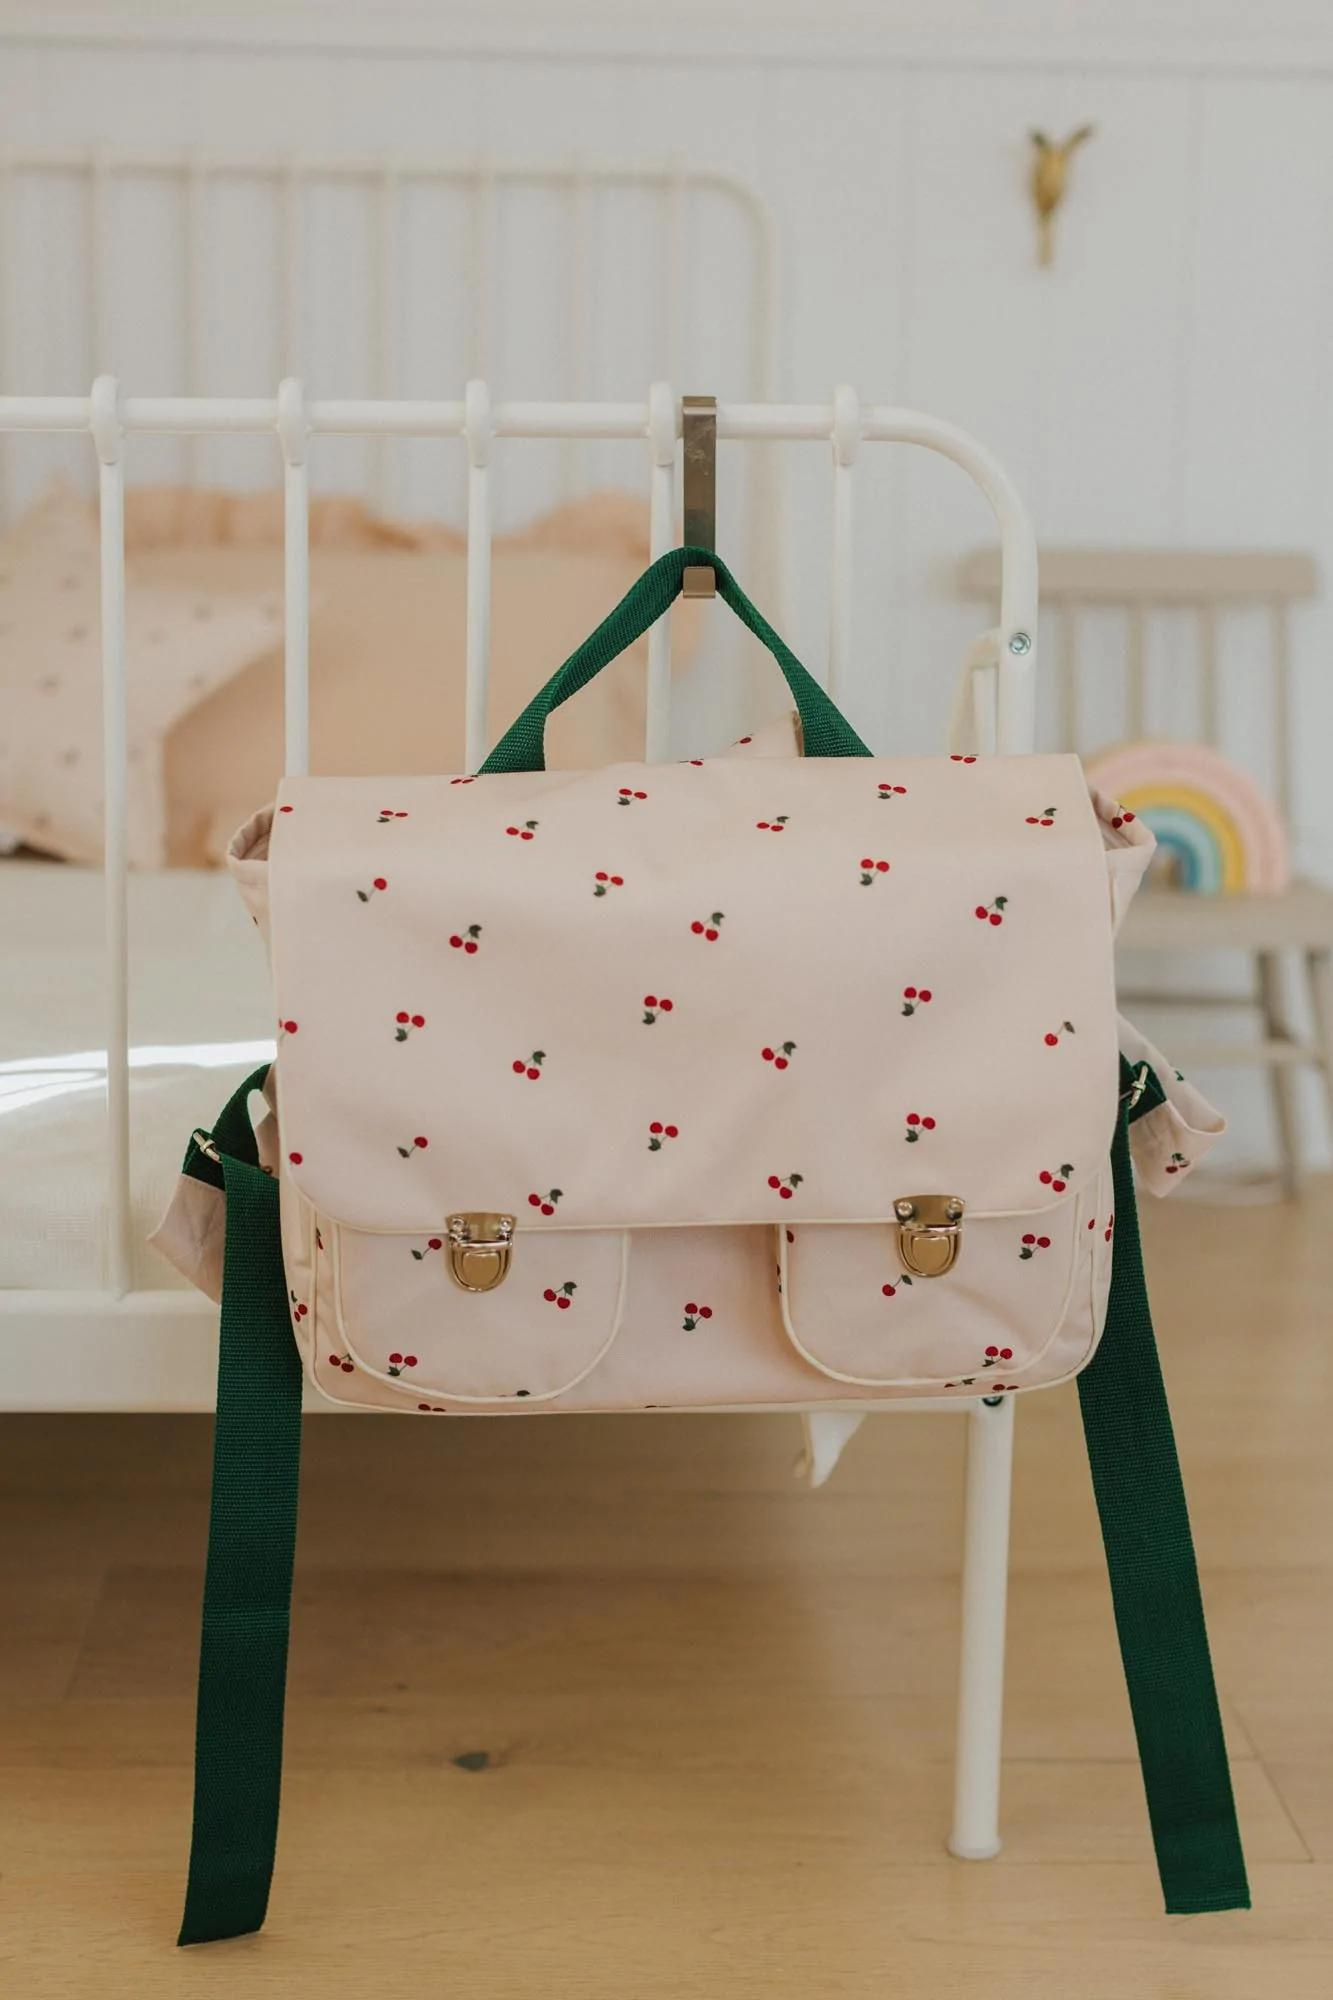 Deer Industries Kids Gift Store singapore, Betty's Home backpack Cherry, Cherry accessories for kids, kids gift idea for girls, gifts for kids